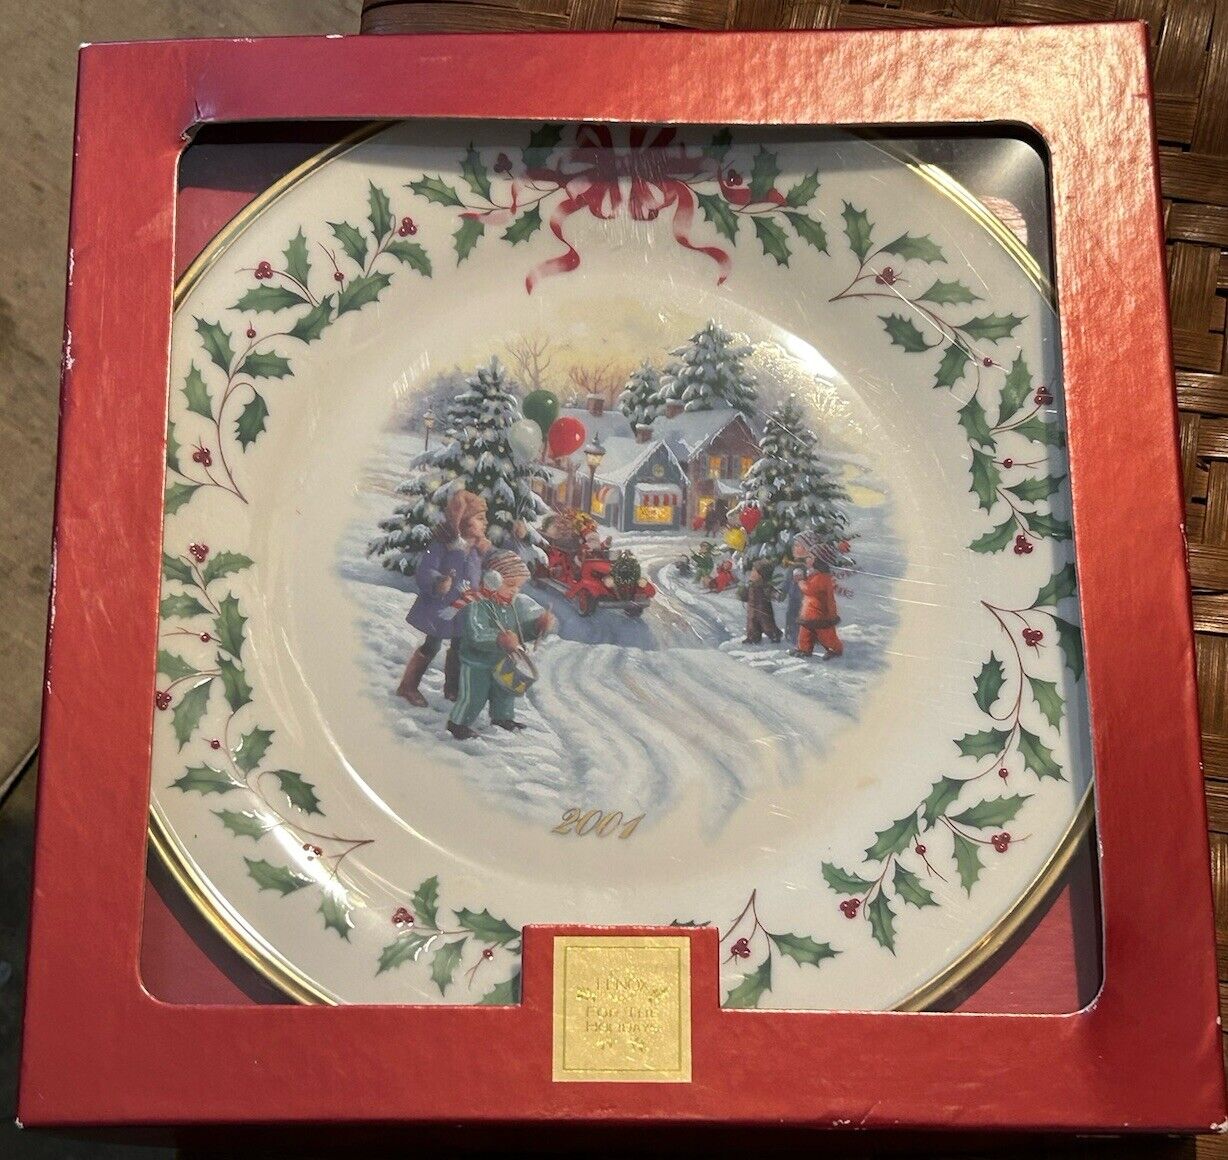 LENOX 2001 ANNUAL HOLIDAY COLLECTOR PLATE IN ORIGINAL PACKAGE - RARE  NOB